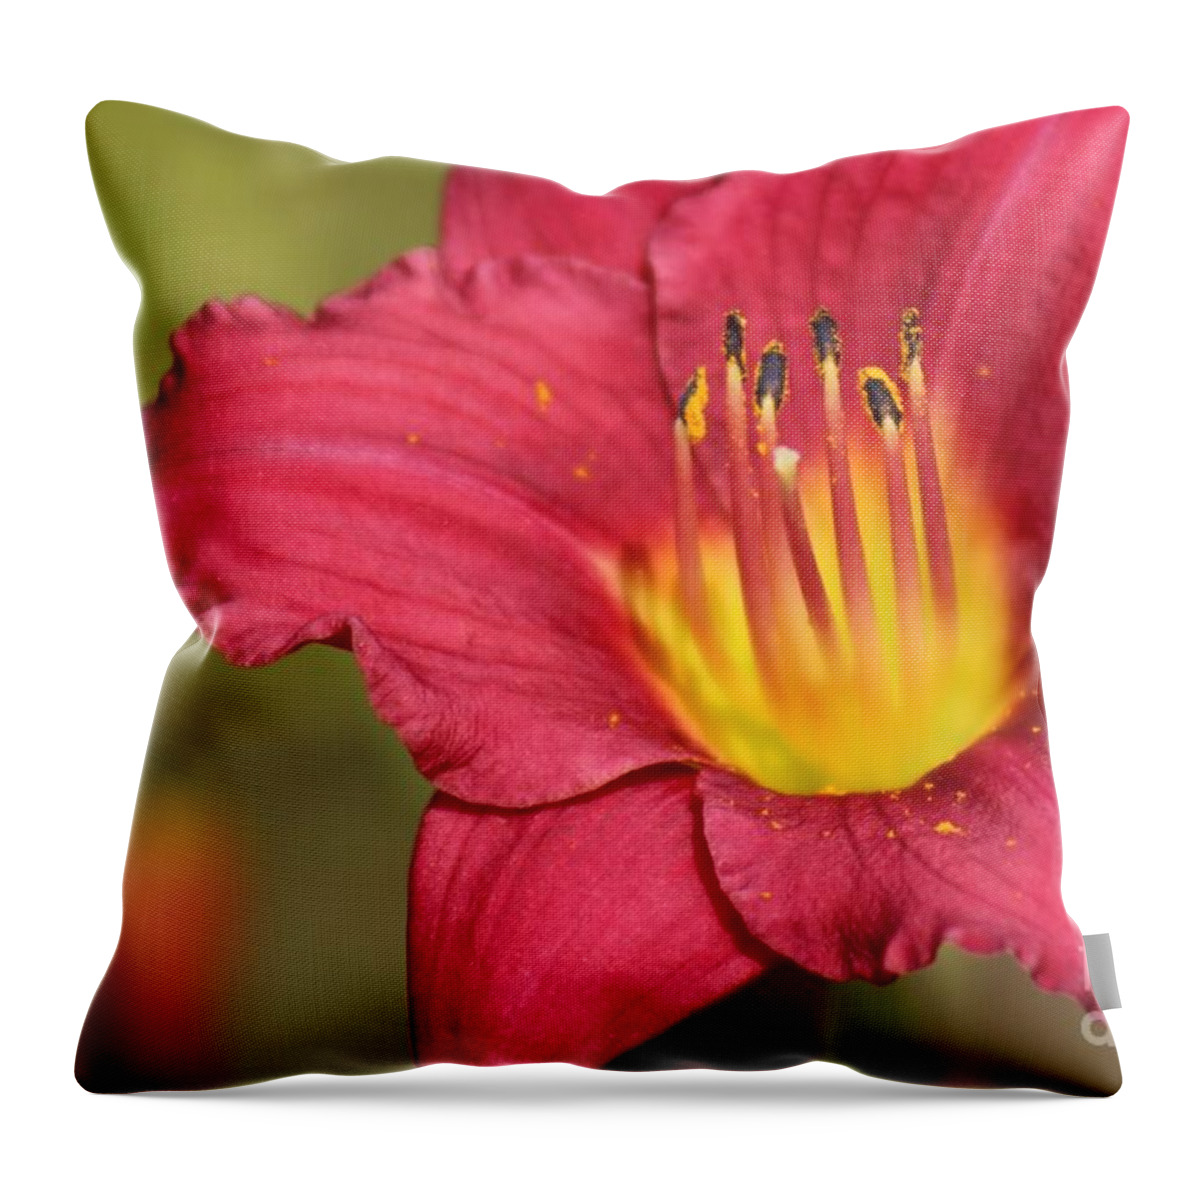 Pink Throw Pillow featuring the photograph Nature's Beauty 121 by Deena Withycombe